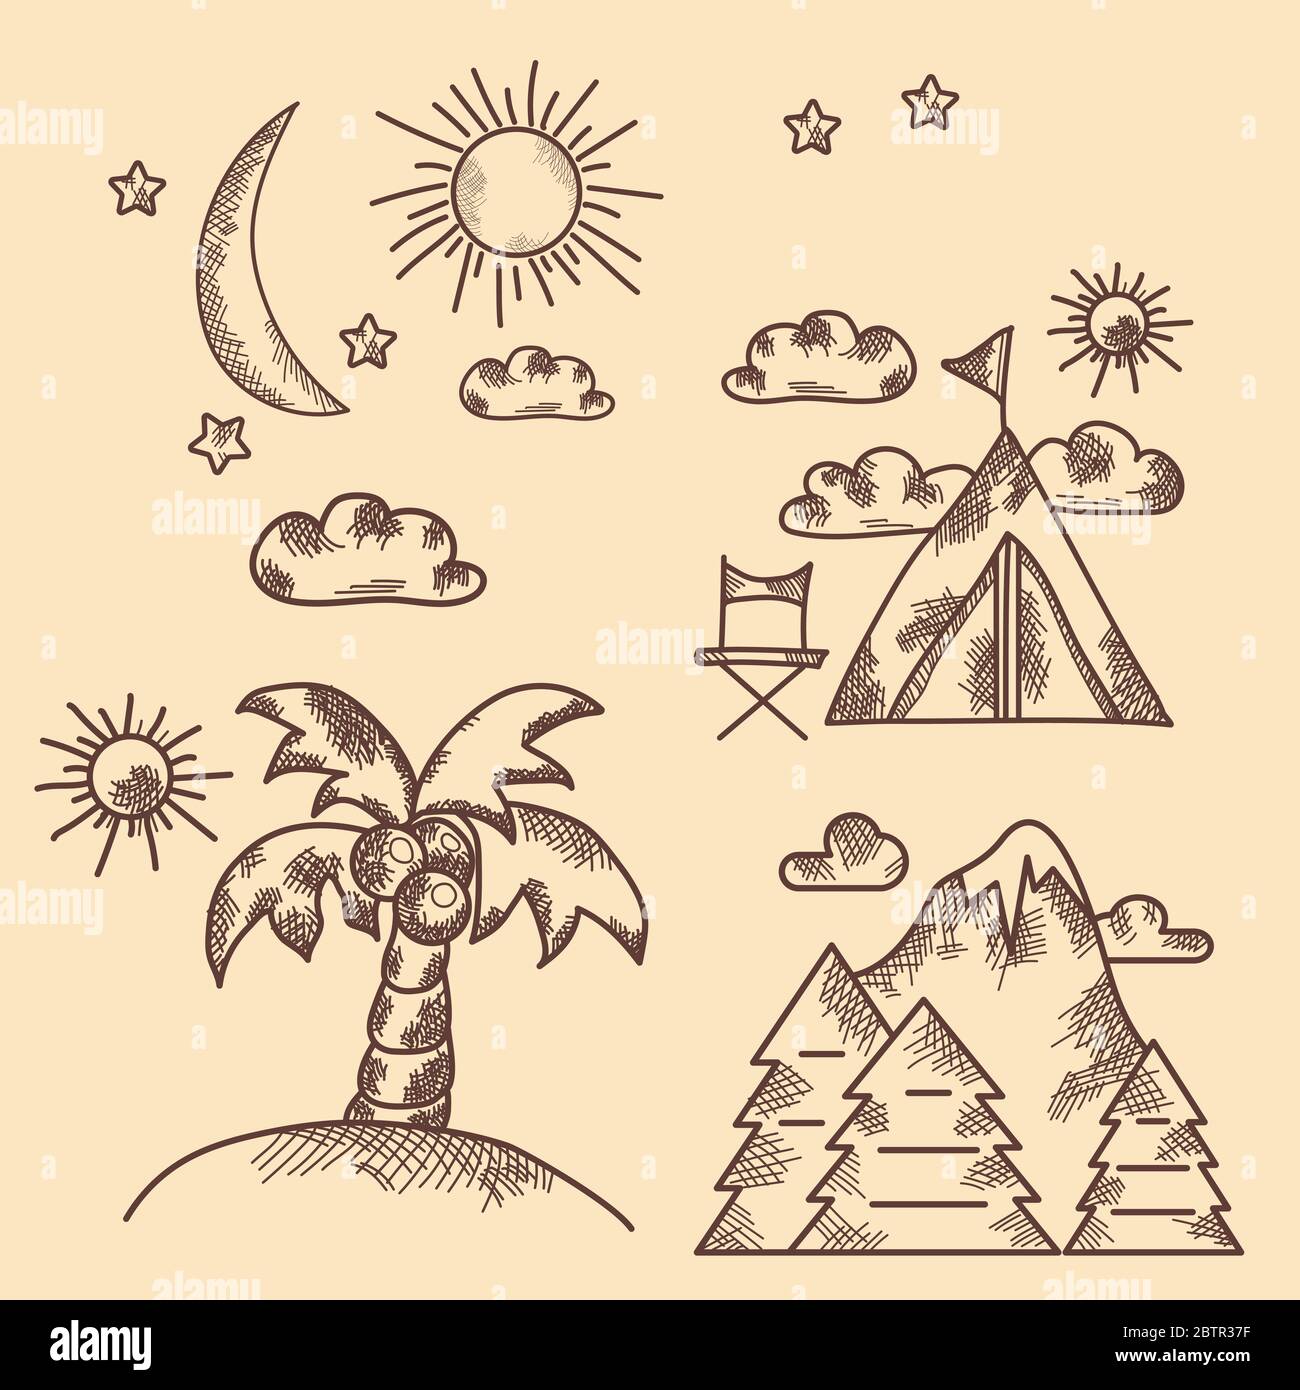 Hand drawn icon set. Vintage. Types of recreation, nature, palm tree, mountain. Collection of vector pictures. Stock Vector